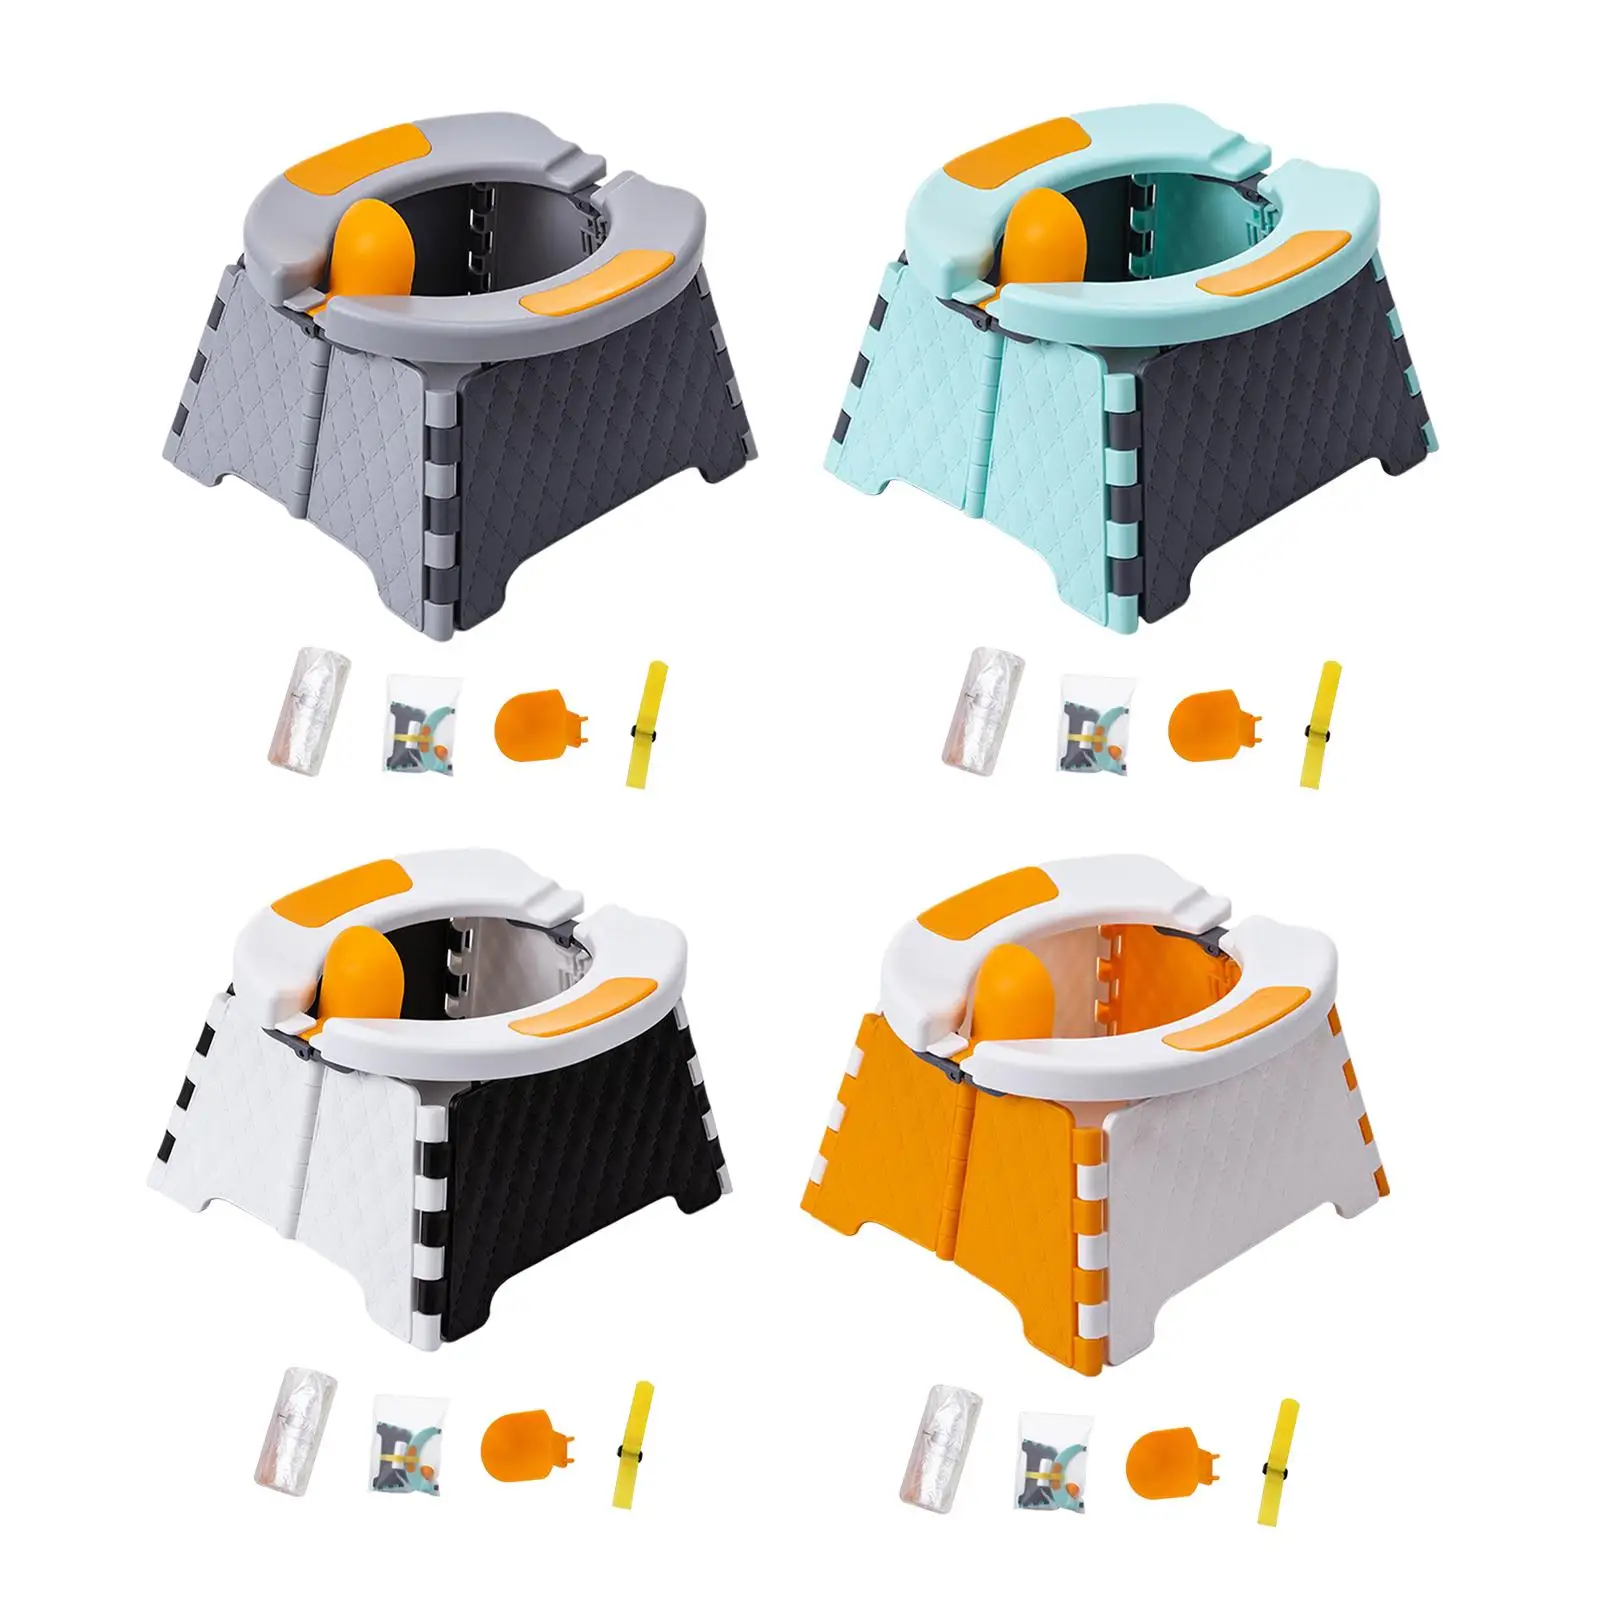 Portable Foldable Training Potty Seat for Toddler Indoor Outdoor Convenience to Clean Suitable for Different Ages Lightweight